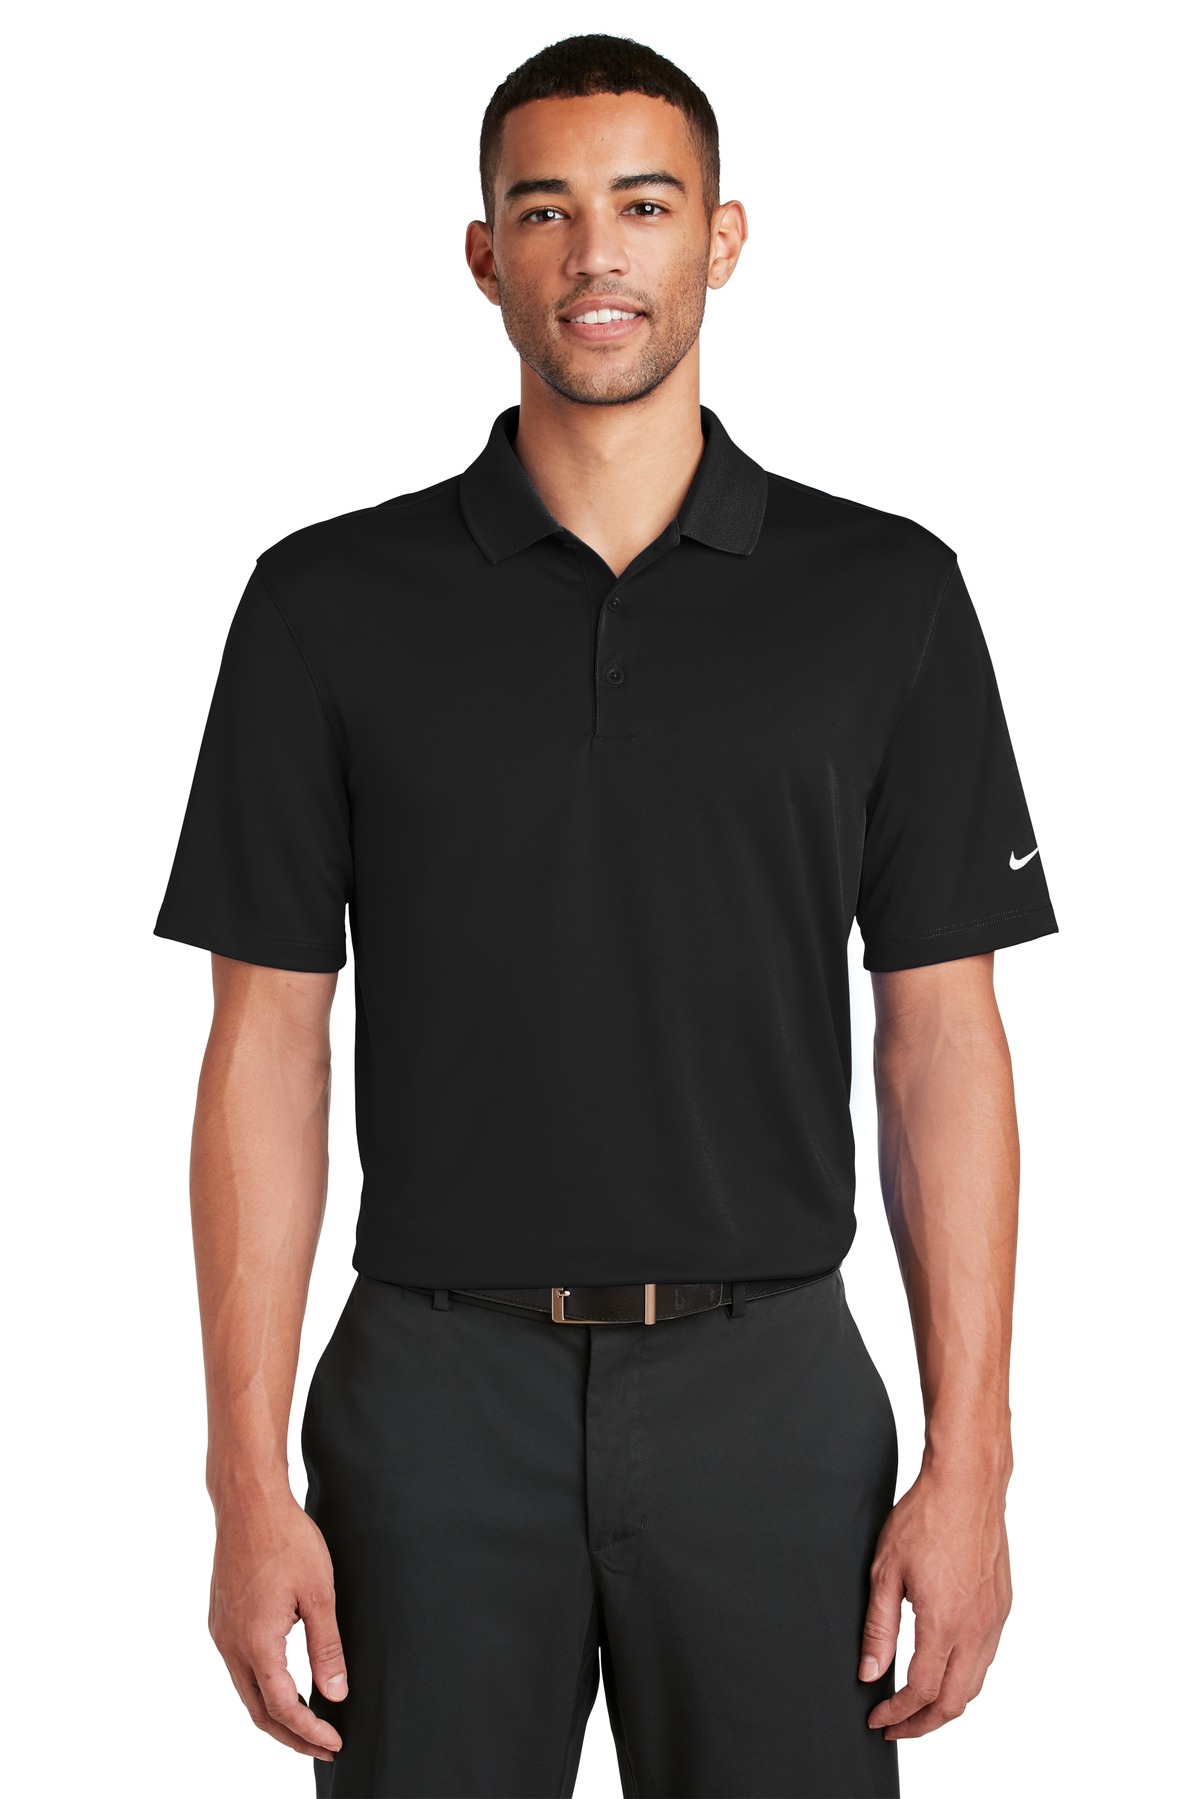 Nike Dri-FIT Classic Fit Players Polo with Flat Knit Collar-Nike